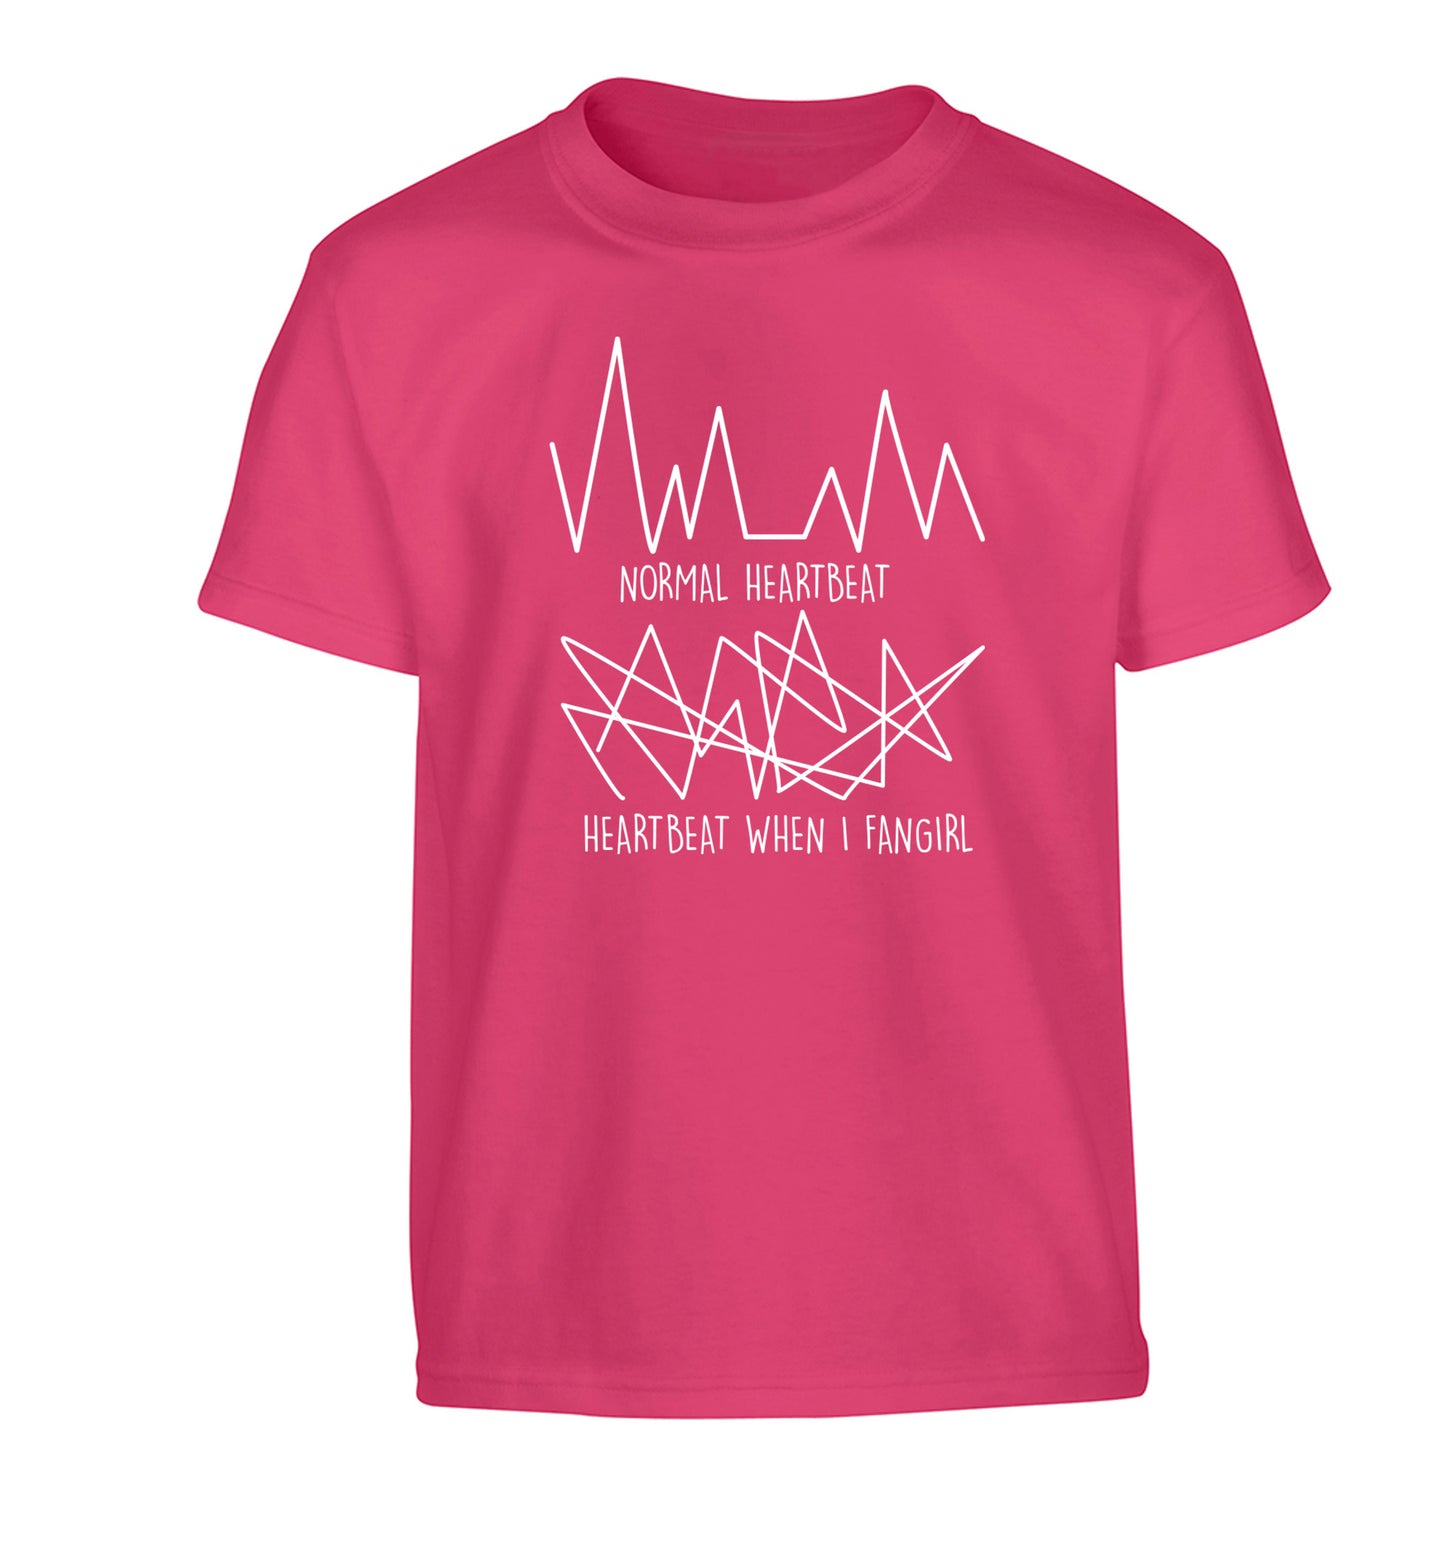 Normal heartbeat heartbeat when I fangirl Children's pink Tshirt 12-14 Years